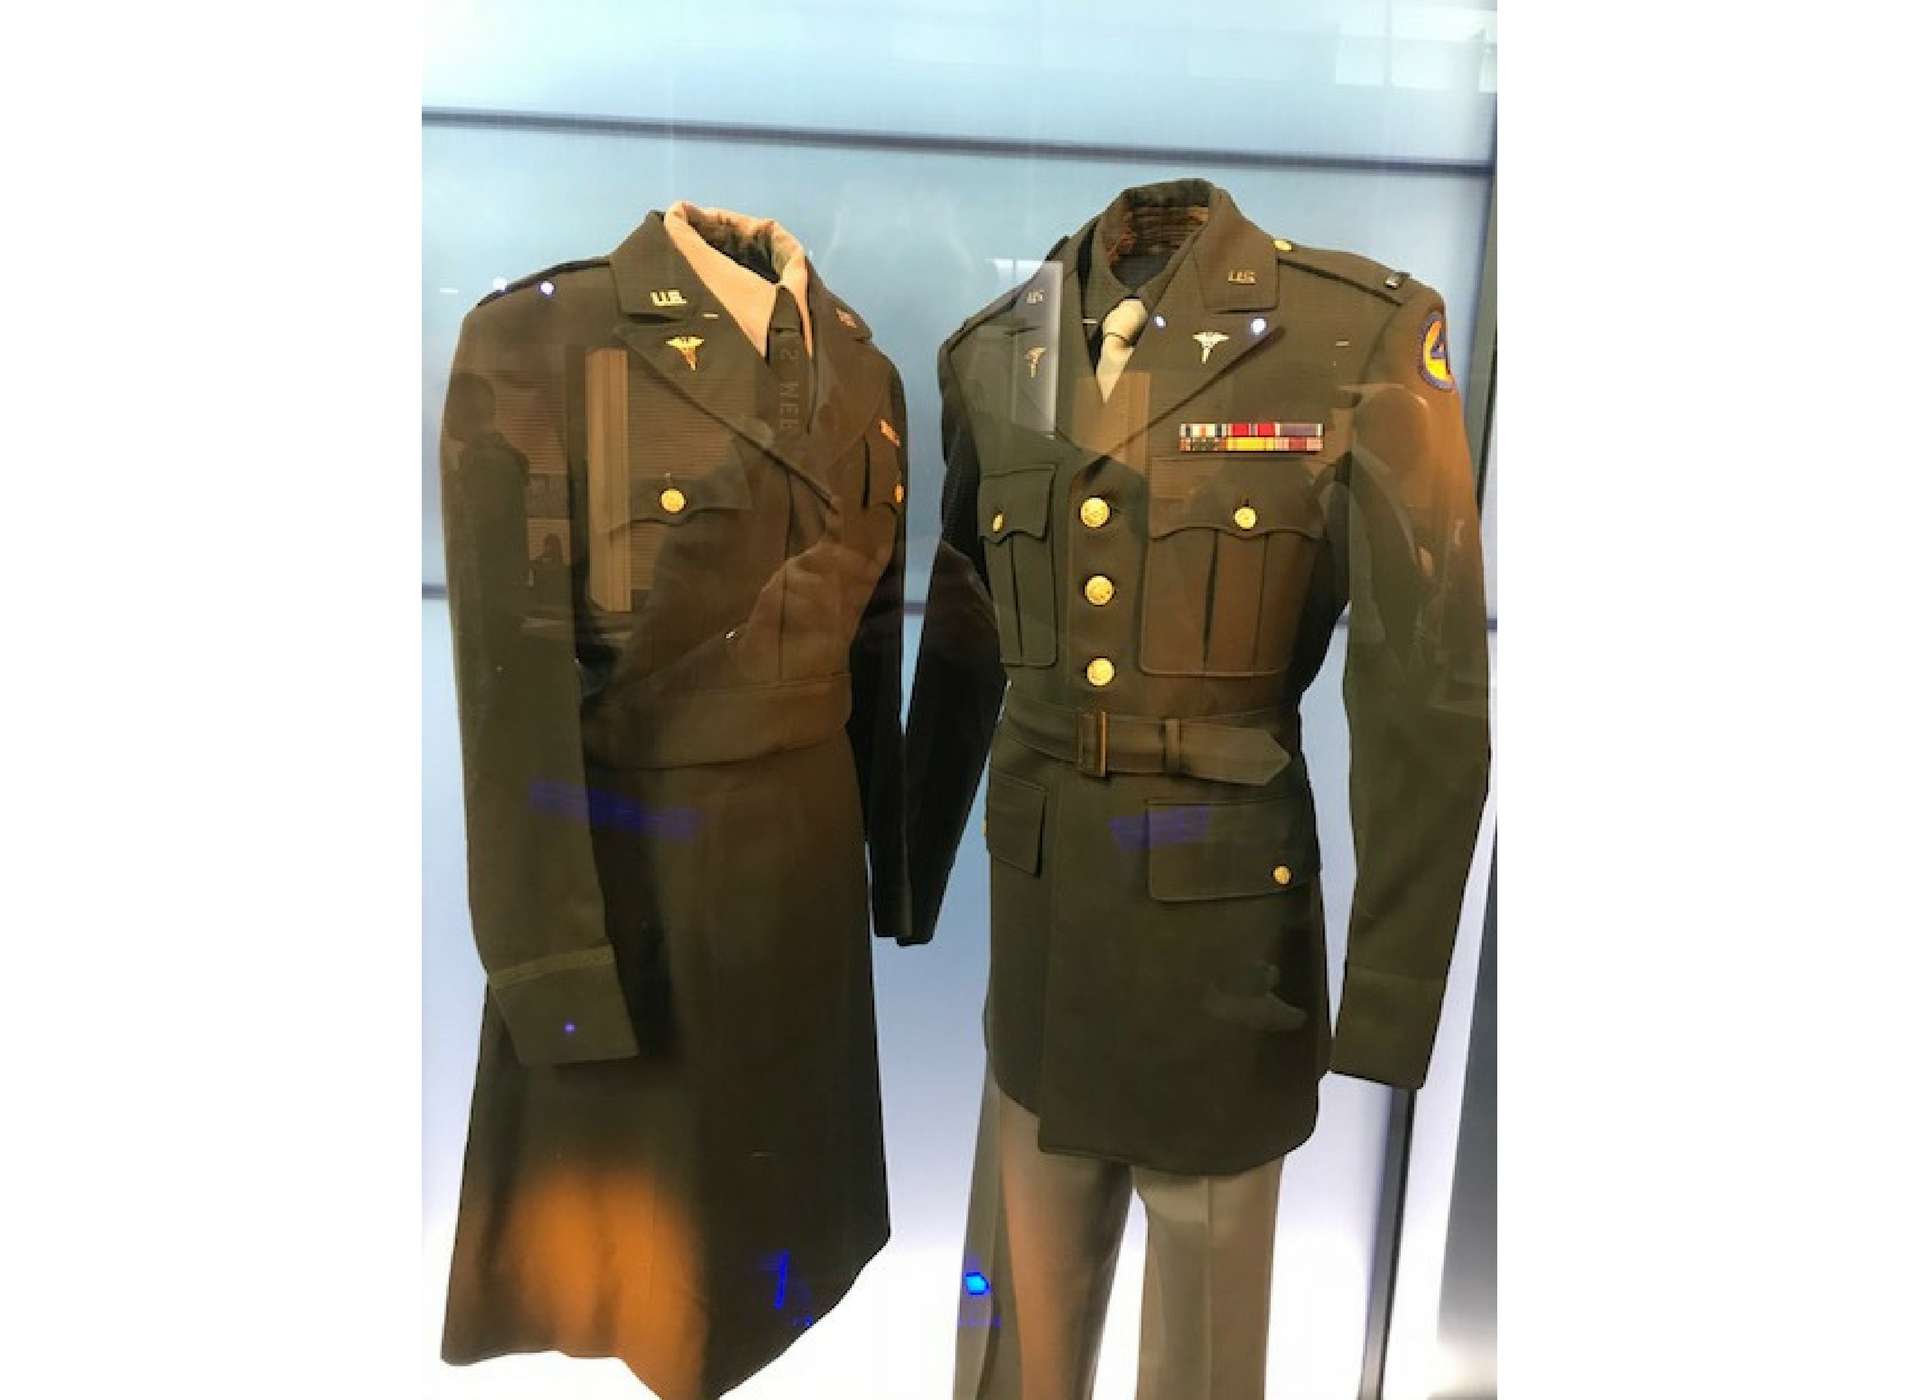 Pinks and Greens” | The National WWII Museum | New Orleans